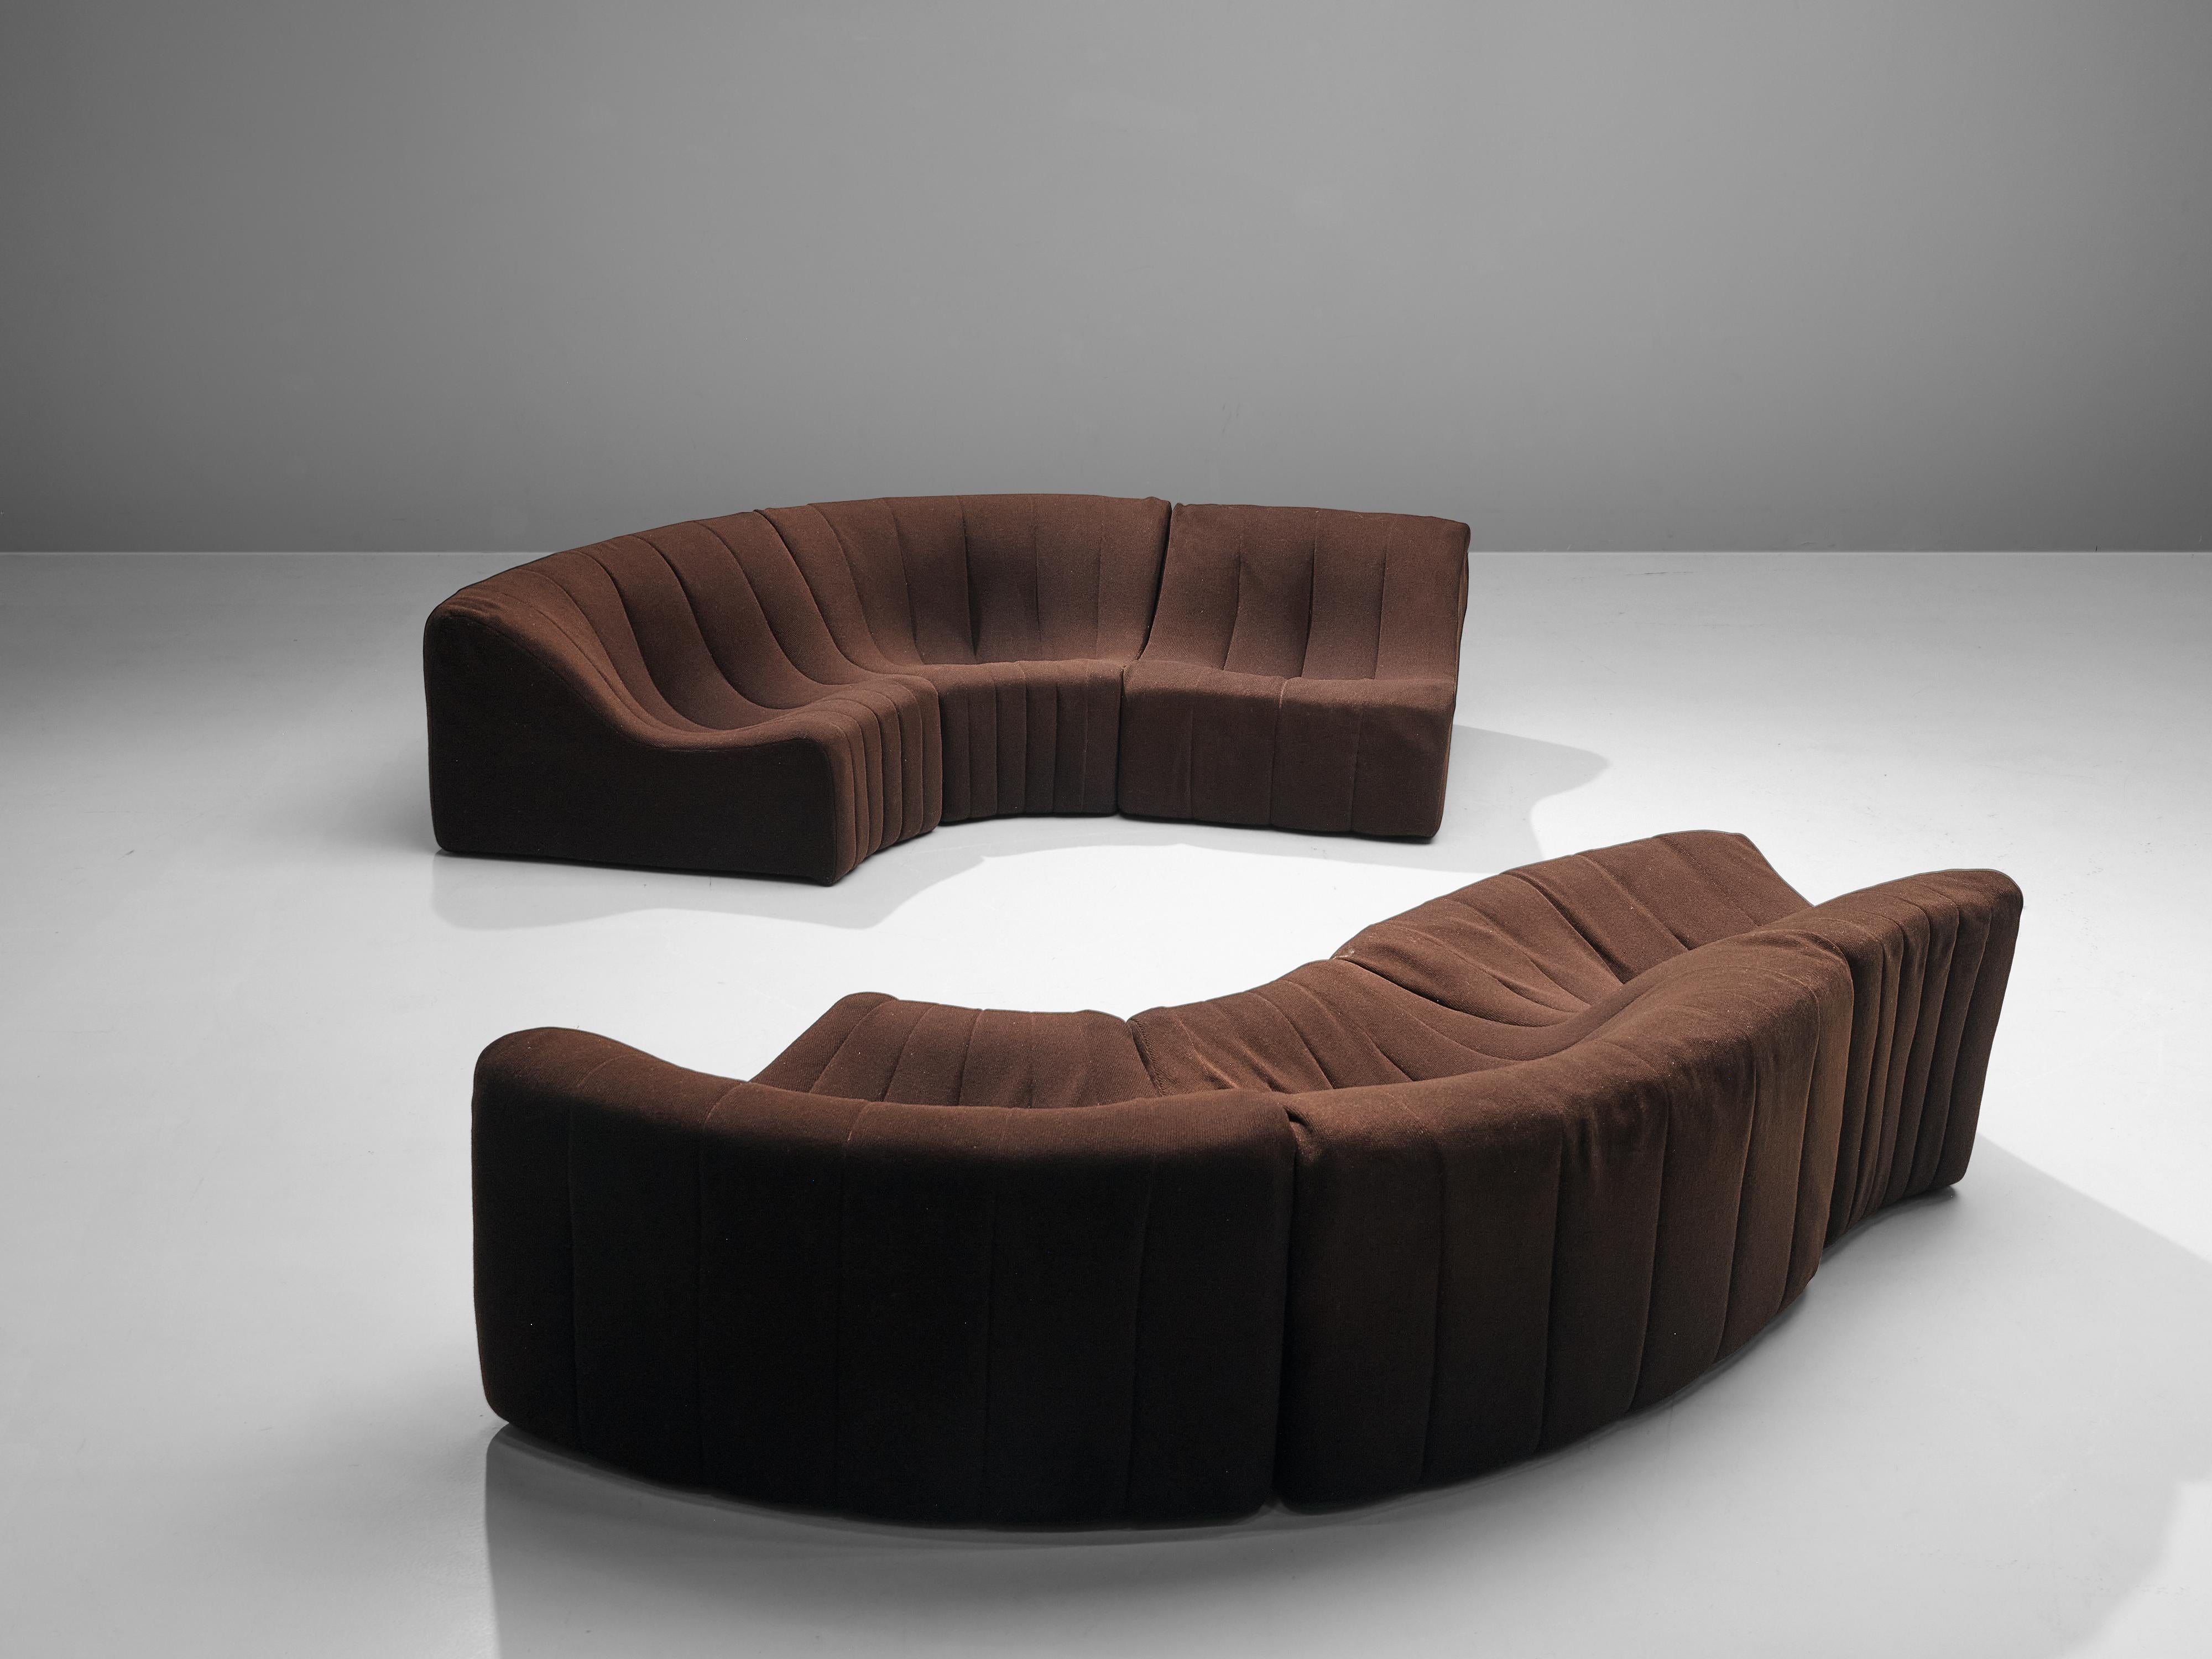 Kwok Hoi Chan for Steiner´Chromatic´ Modular Sofa in Brown Upholstery 1